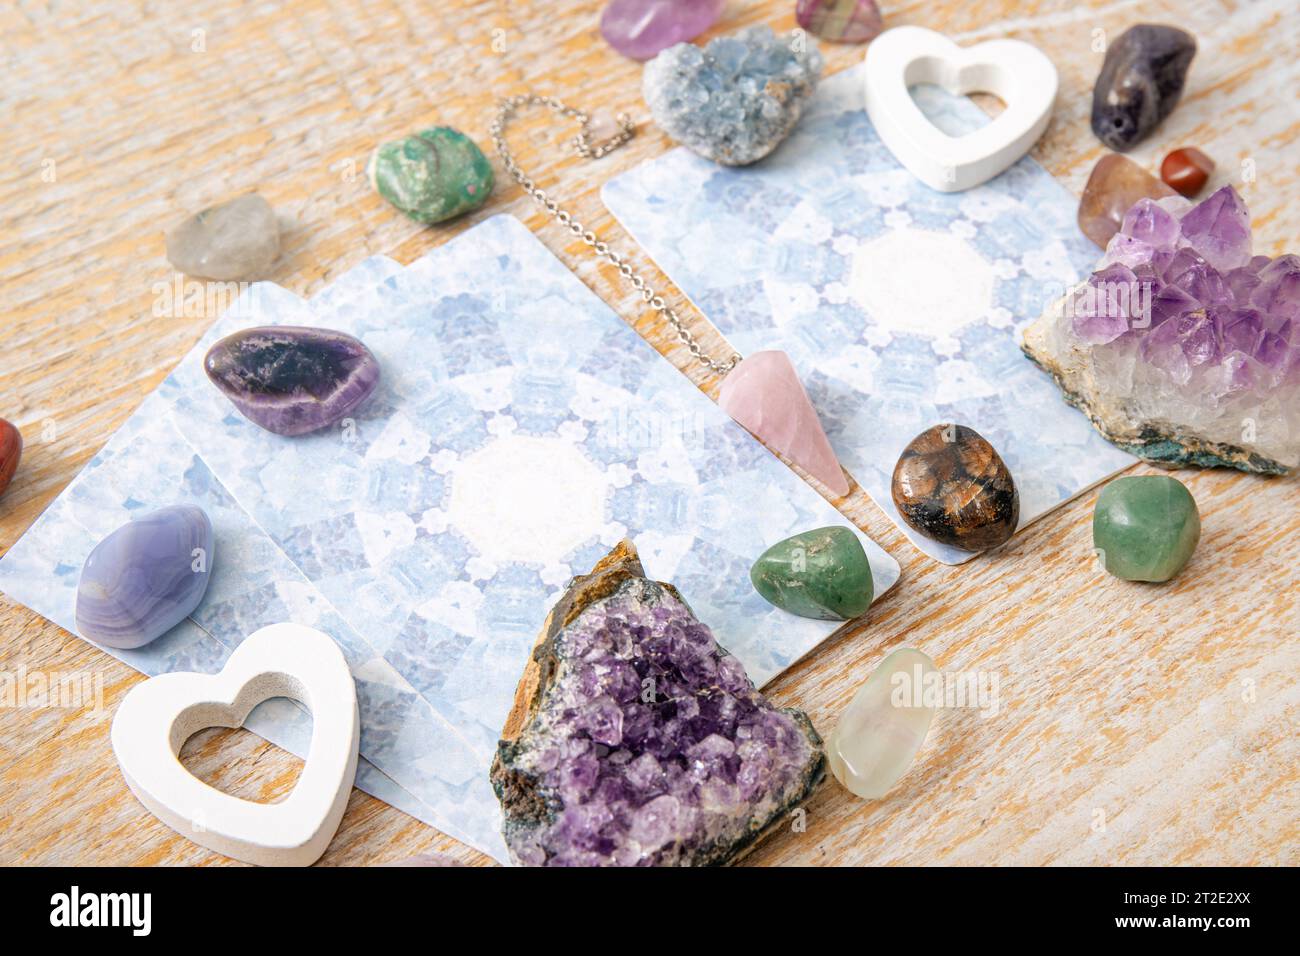 Deck with handmade fortune telling Angel cards on bright wooden table, surrounded with semi precious stones crystals for decoration. Stock Photo